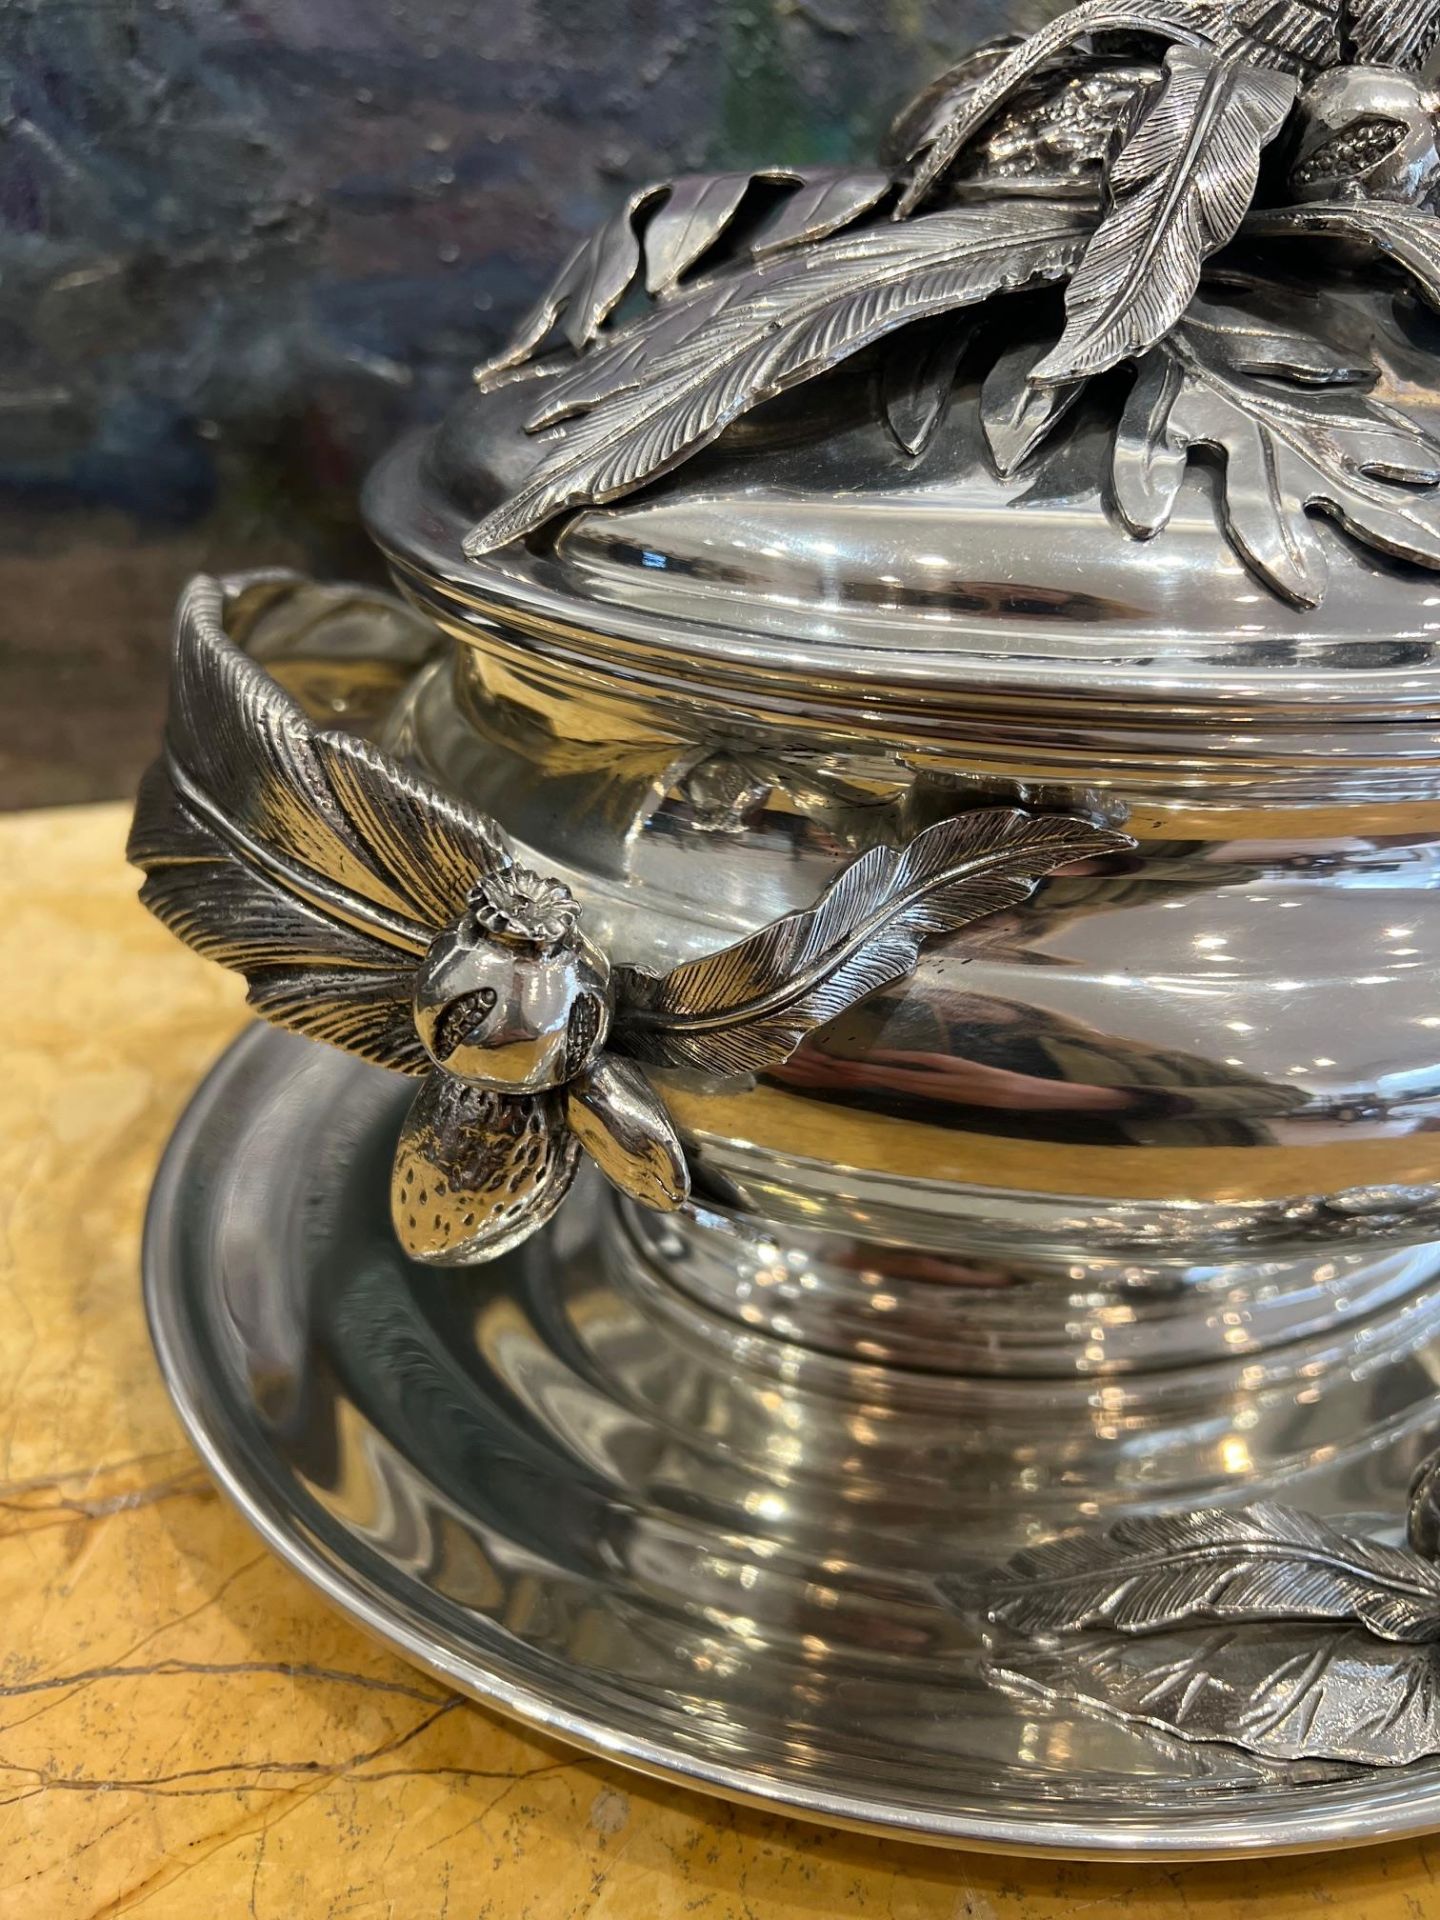 AN ITALIAN SILVER PLATED TUREEN AND STAND IN THE STYLE OF BUCCELLATI - Image 6 of 8